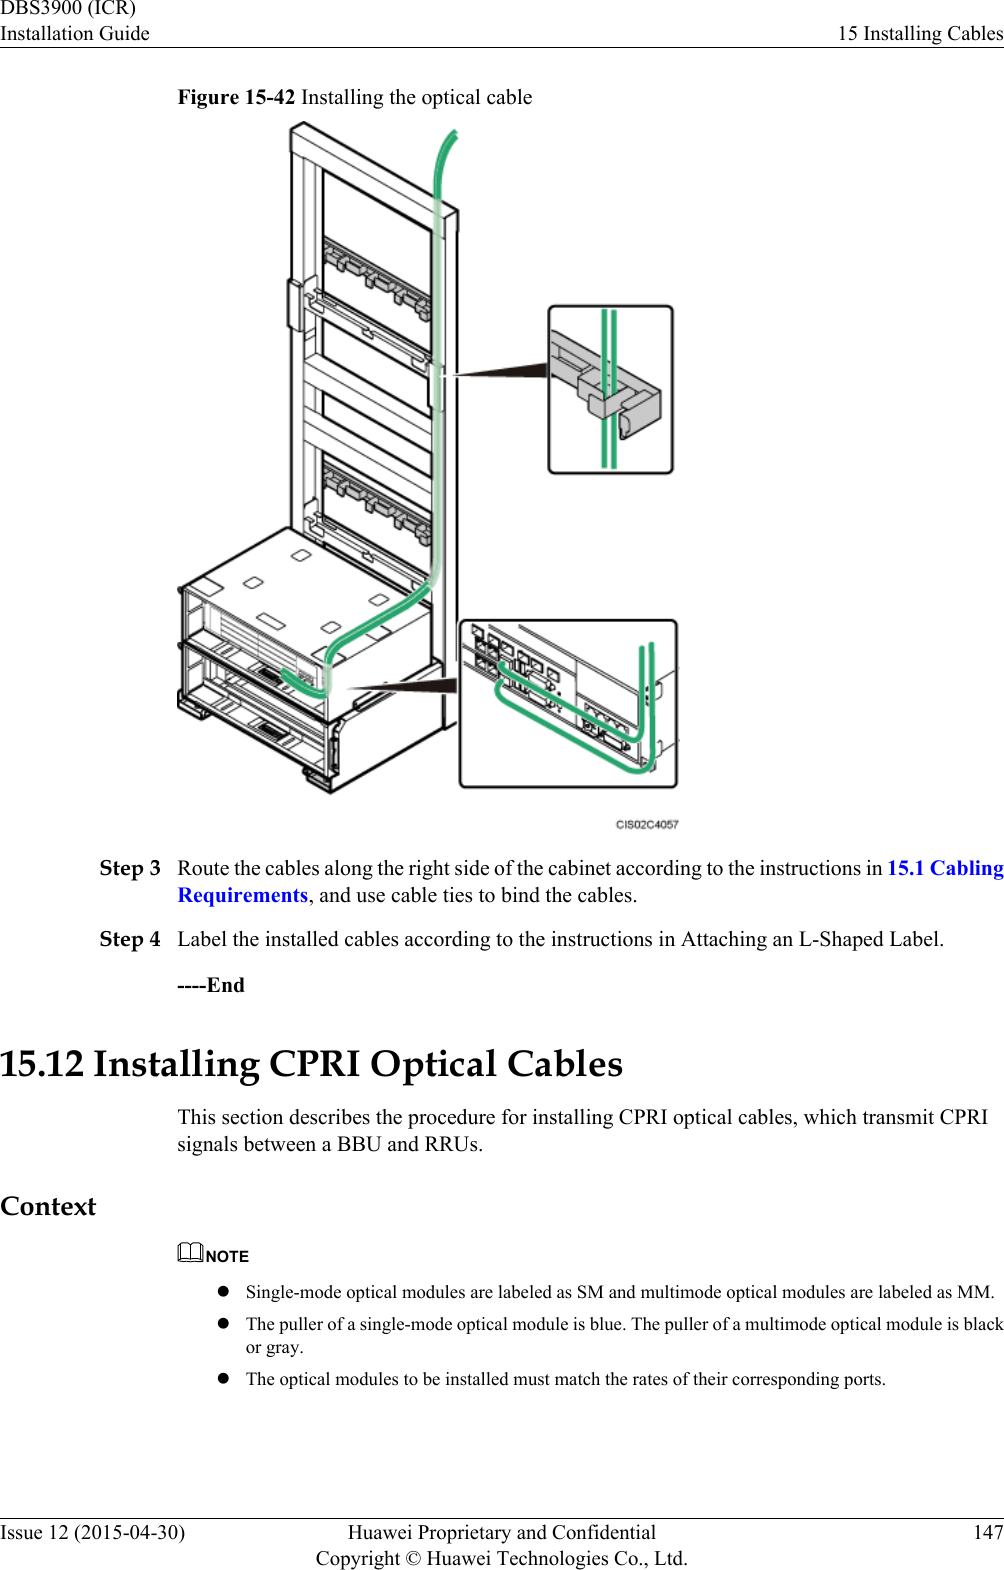 Figure 15-42 Installing the optical cableStep 3 Route the cables along the right side of the cabinet according to the instructions in 15.1 CablingRequirements, and use cable ties to bind the cables.Step 4 Label the installed cables according to the instructions in Attaching an L-Shaped Label.----End15.12 Installing CPRI Optical CablesThis section describes the procedure for installing CPRI optical cables, which transmit CPRIsignals between a BBU and RRUs.ContextNOTElSingle-mode optical modules are labeled as SM and multimode optical modules are labeled as MM.lThe puller of a single-mode optical module is blue. The puller of a multimode optical module is blackor gray.lThe optical modules to be installed must match the rates of their corresponding ports.DBS3900 (ICR)Installation Guide 15 Installing CablesIssue 12 (2015-04-30) Huawei Proprietary and ConfidentialCopyright © Huawei Technologies Co., Ltd.147